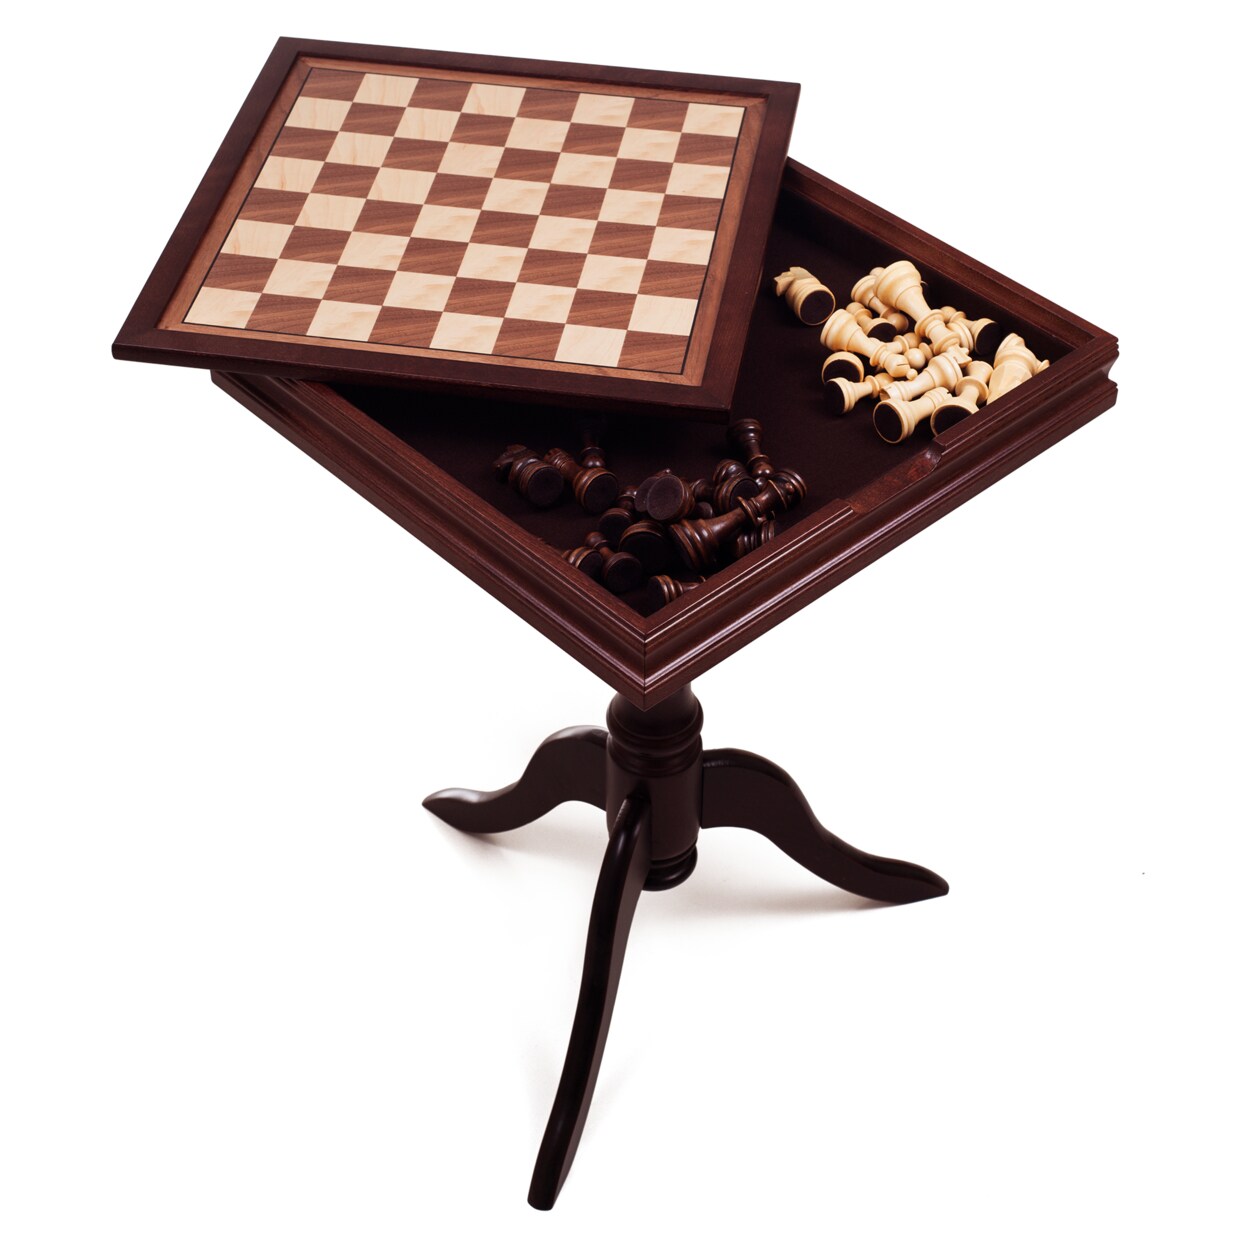 Trademark Games Deluxe Chess and Backgammon Table with Chess Pieces  Wooden Chess Table